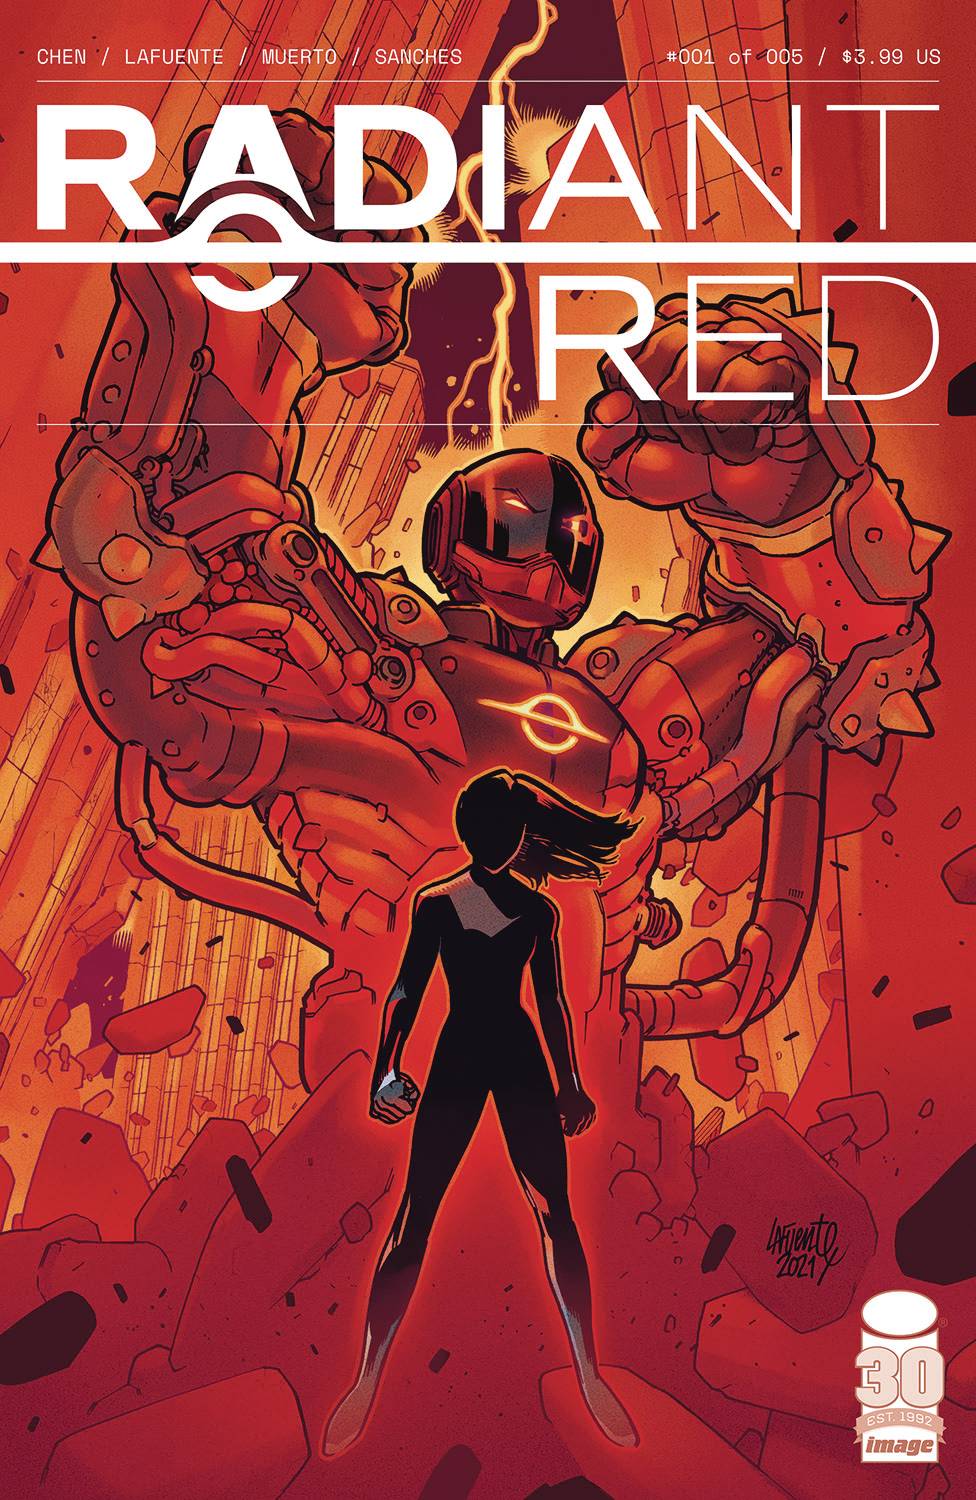 03/09/2022 RADIANT RED #1 (OF 5) CVR A LAFUENTE & MUERTO